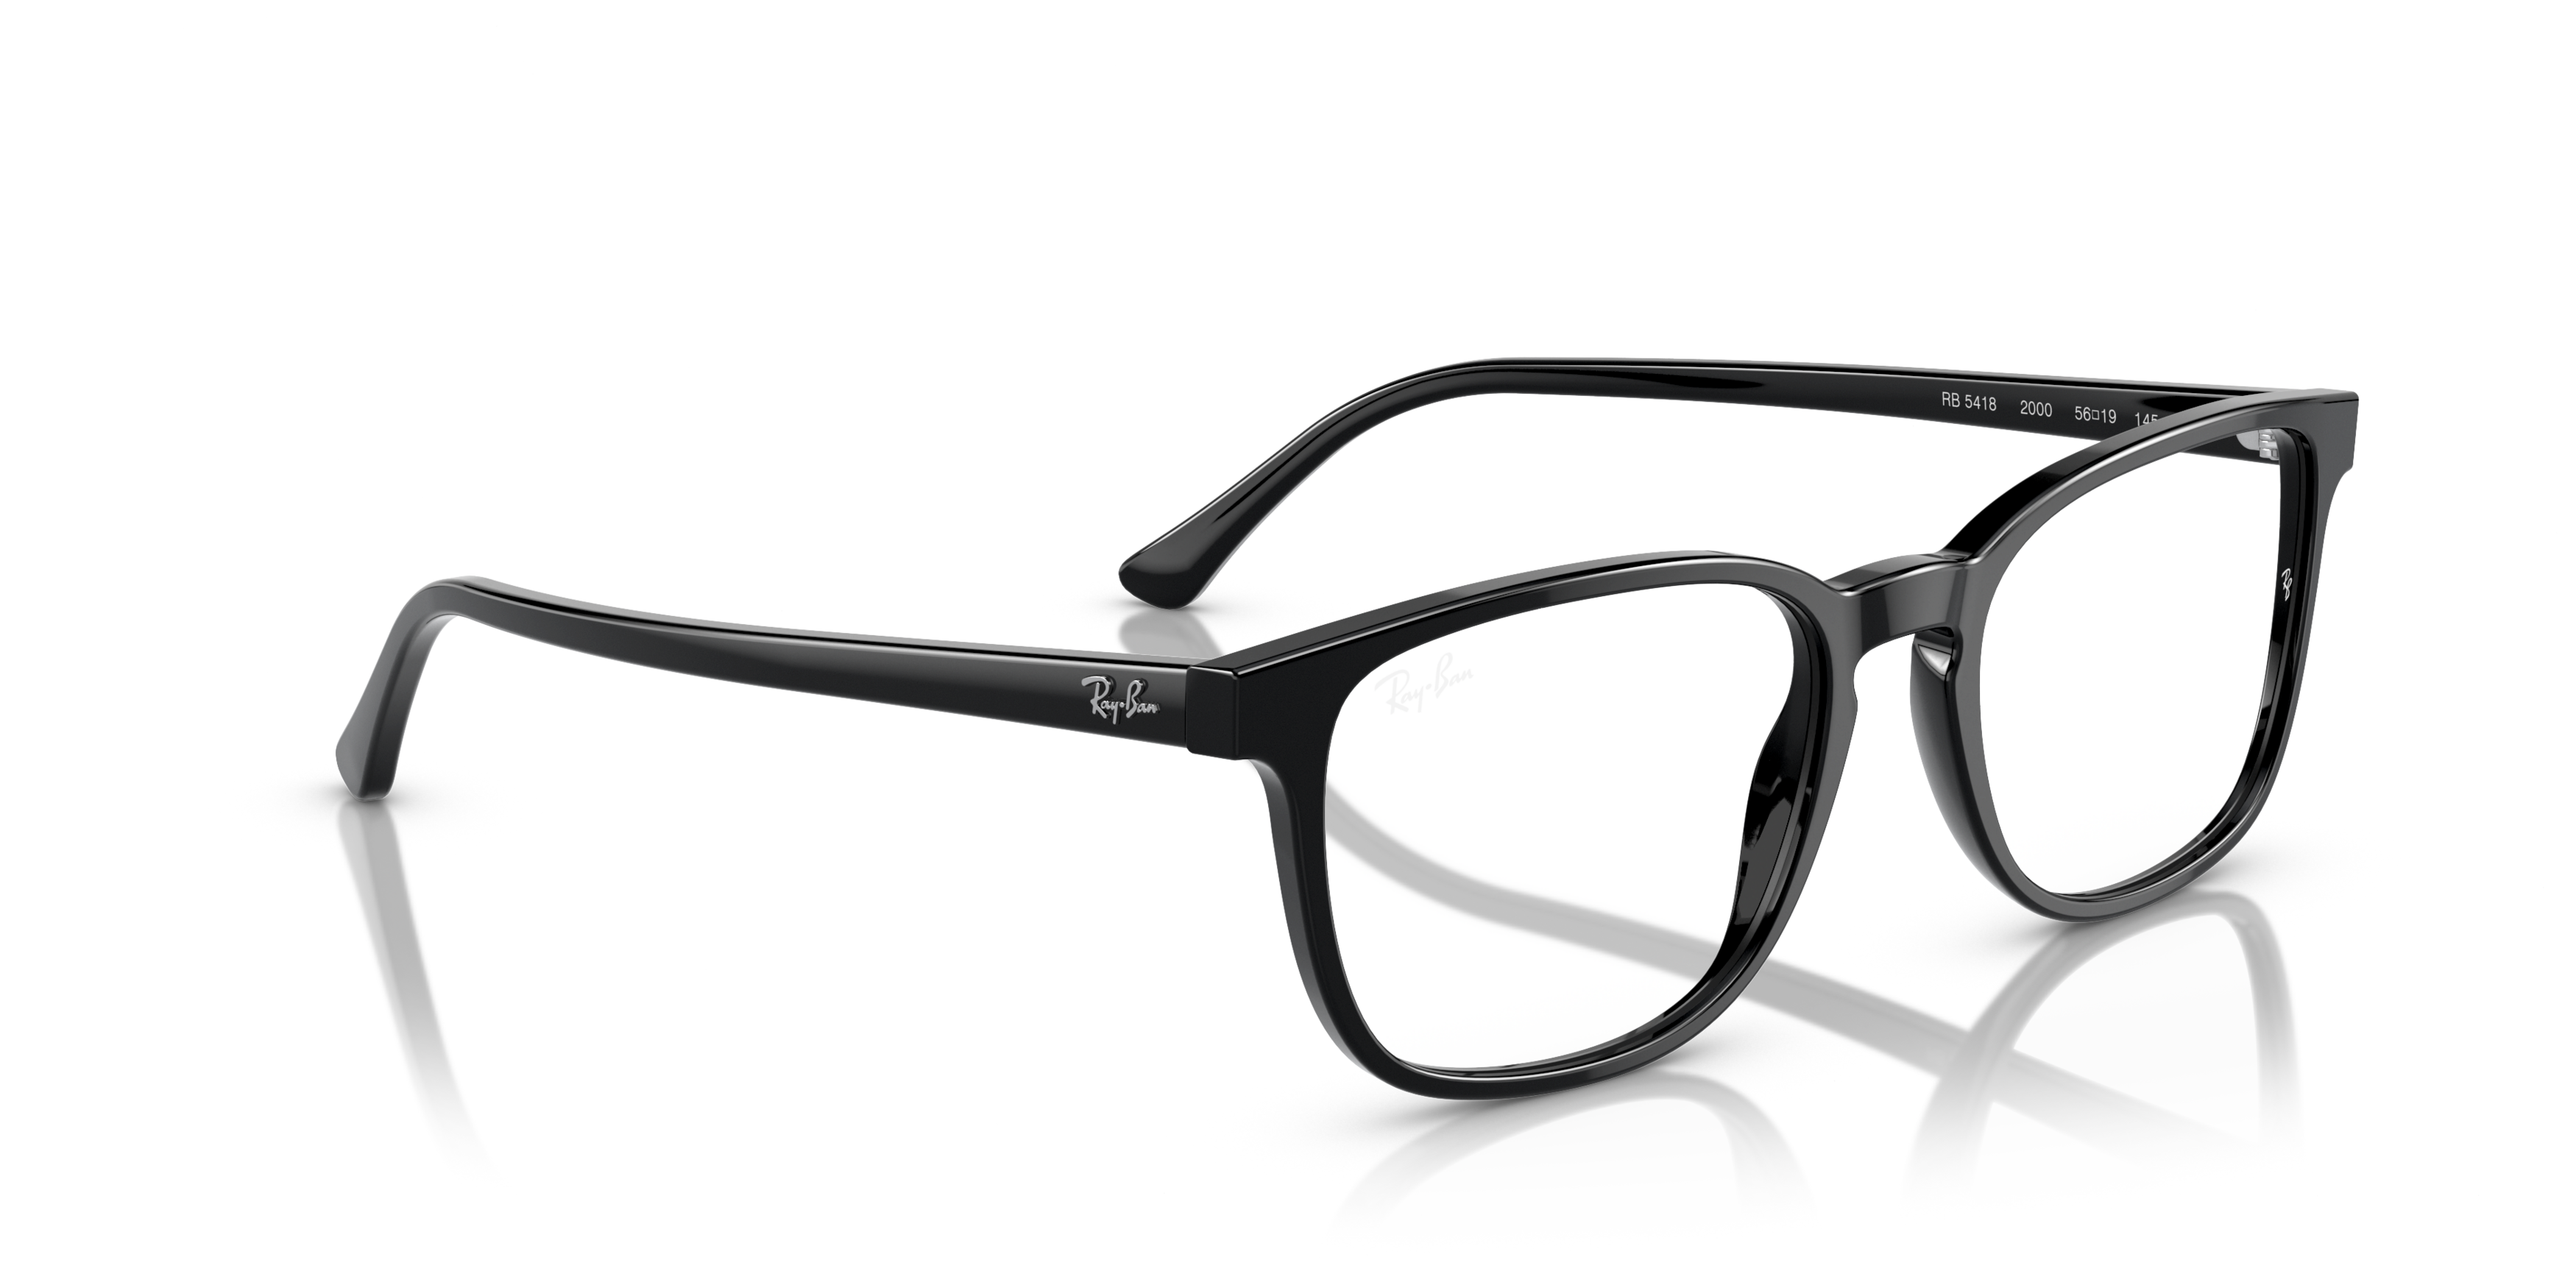 Angle_Right01 Ray-Ban RX 5418 Glasses Transparent / Black